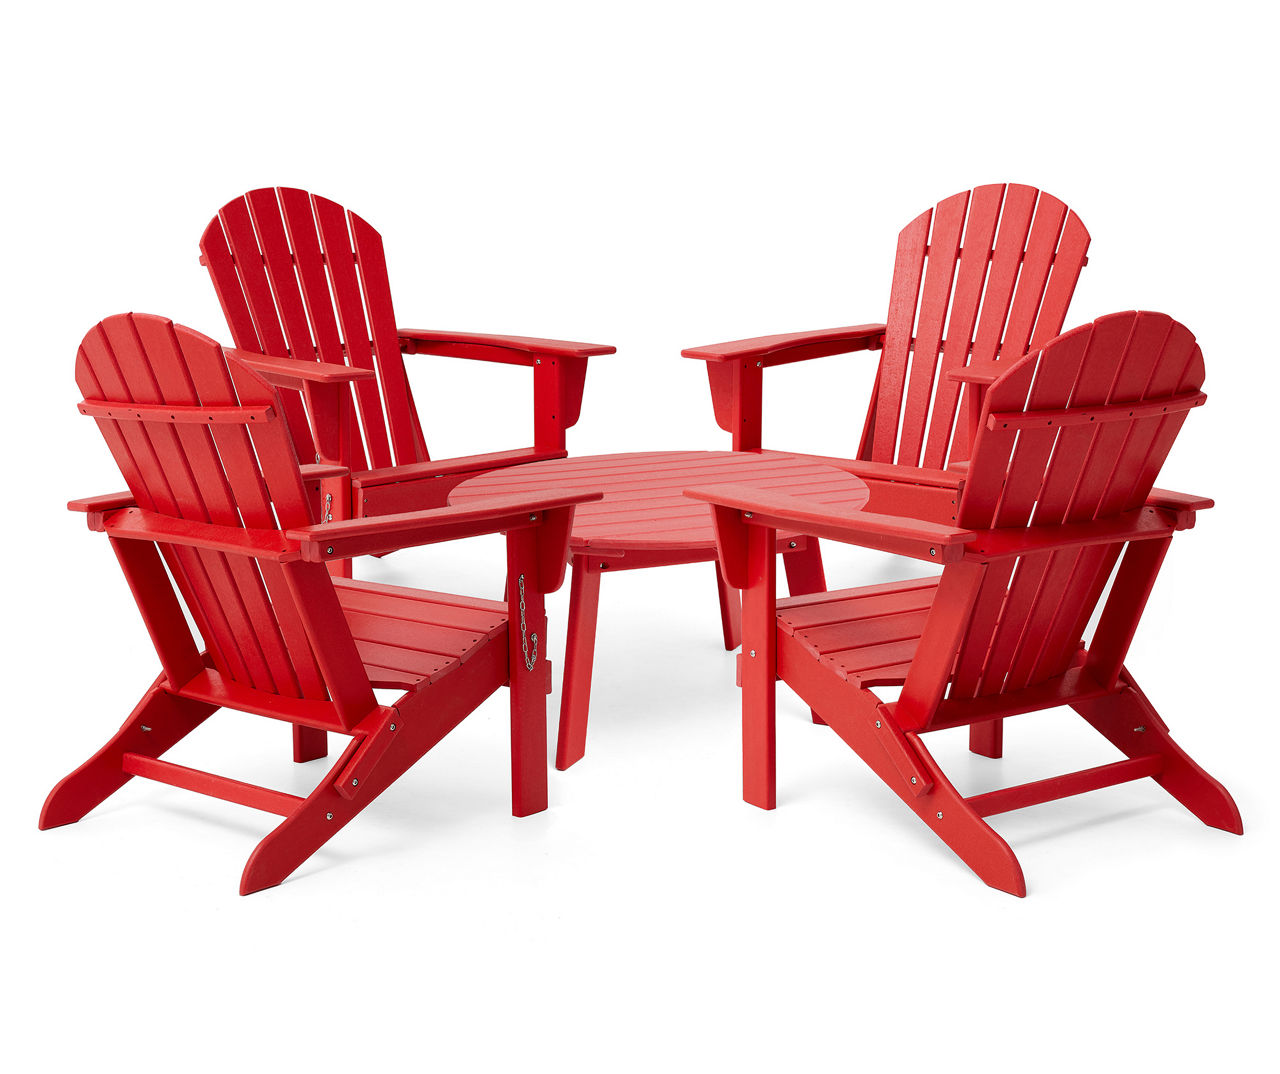 Red 5-Piece Adirondack Outdoor Folding Chair & 35.5" Coffee Table Set